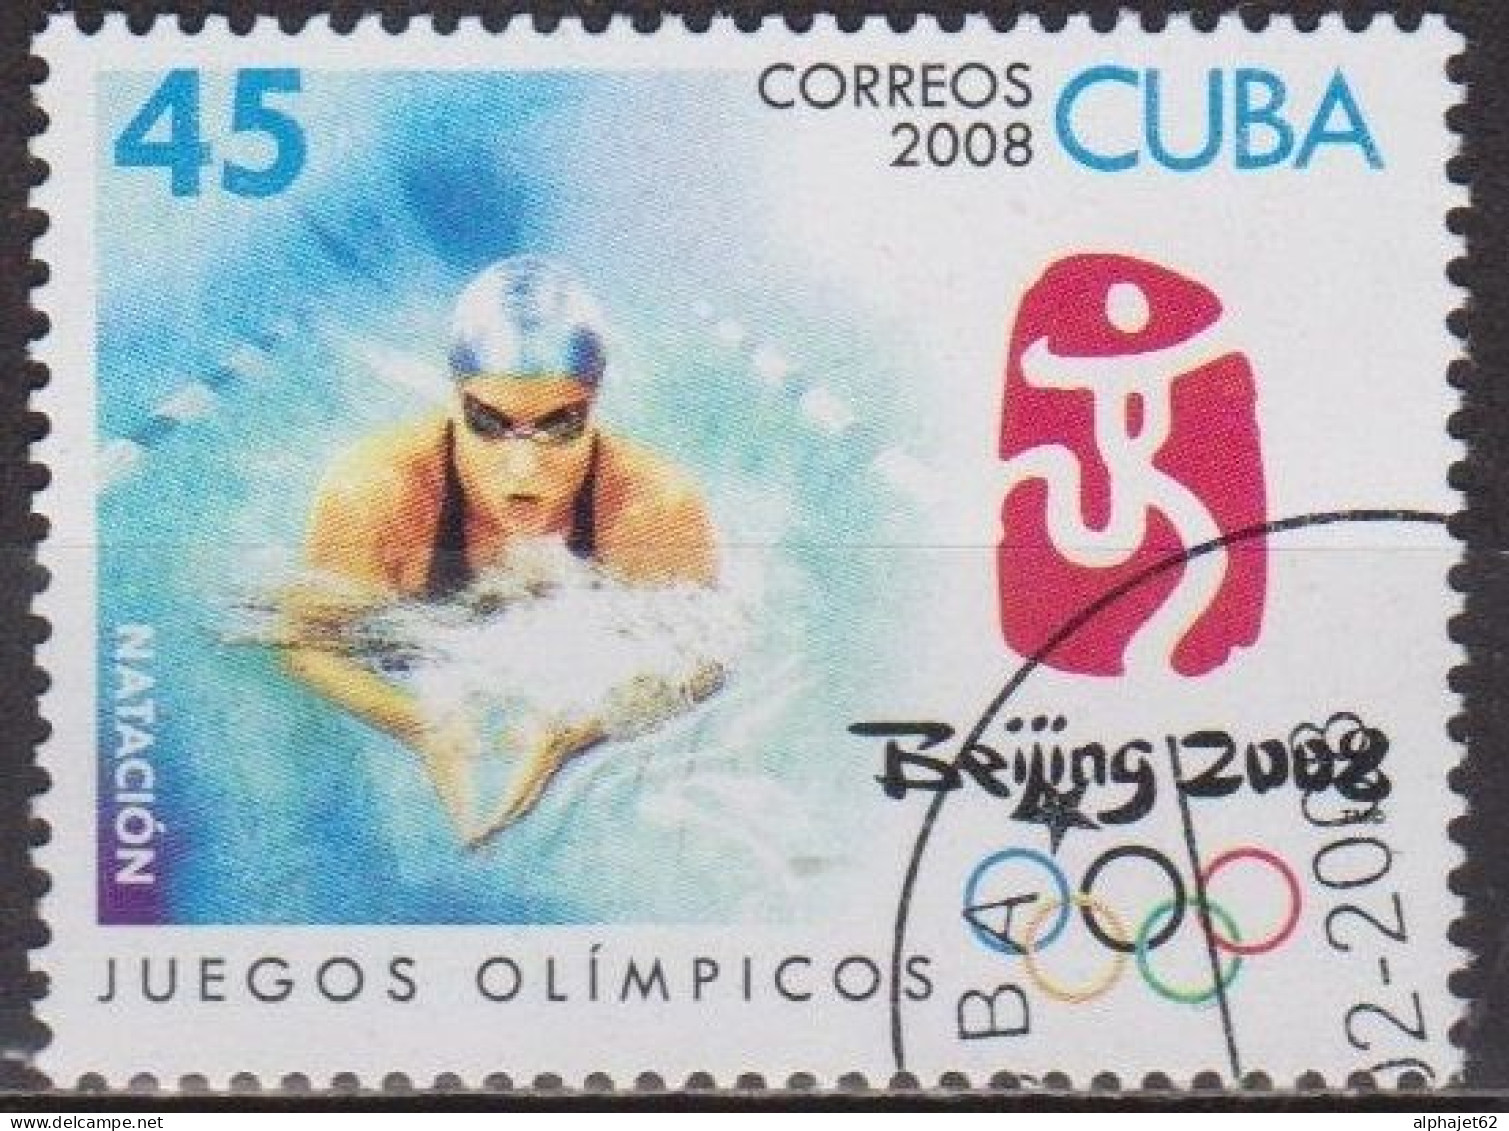 Sport Olympique - CUBA - Natation: Brasse - N° 4539 - 2008 - Used Stamps